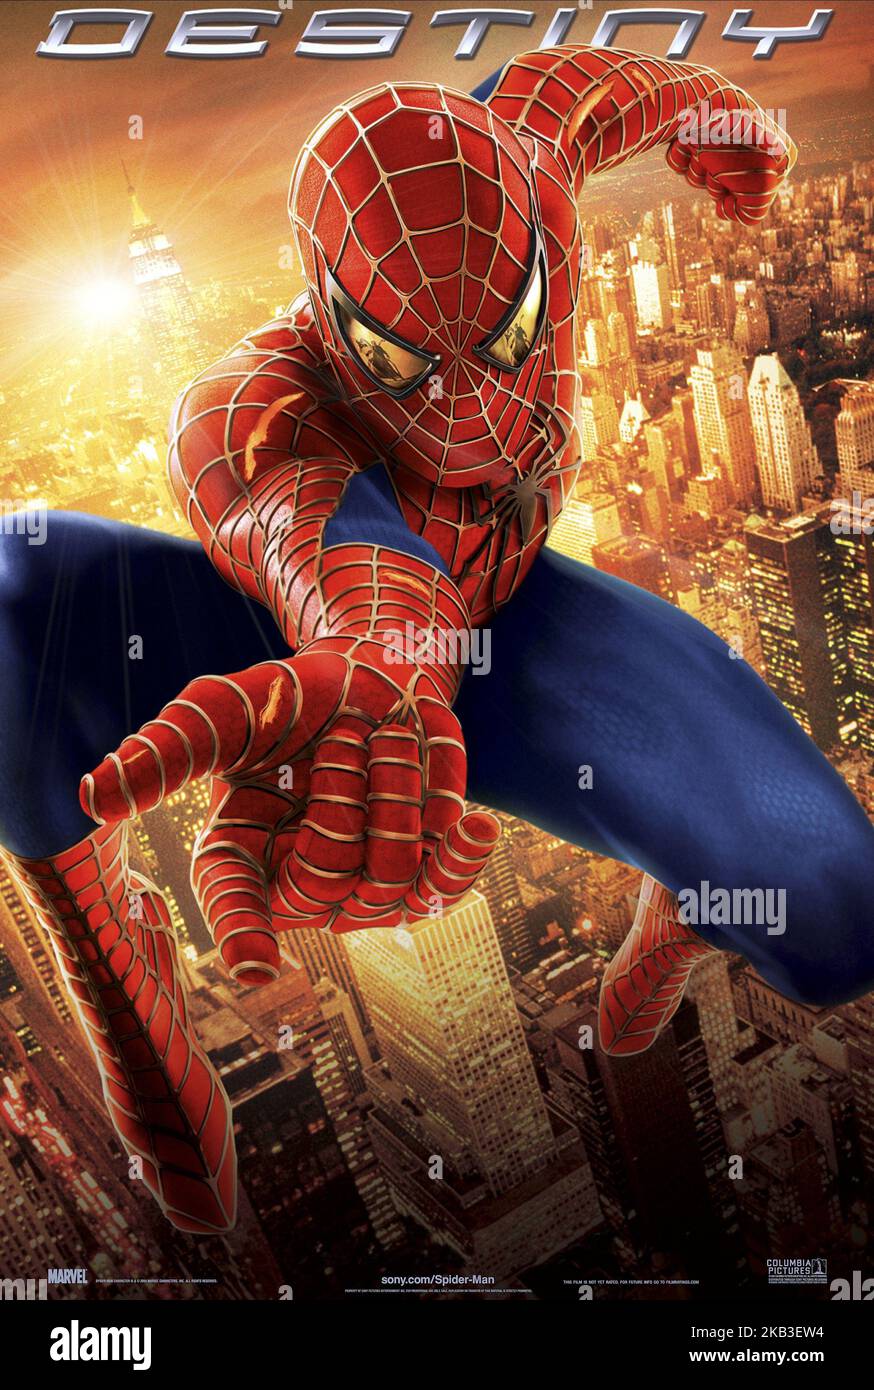 SPIDER-MAN 2, TOBEY MAGUIRE POSTER, 2004 Stock Photo